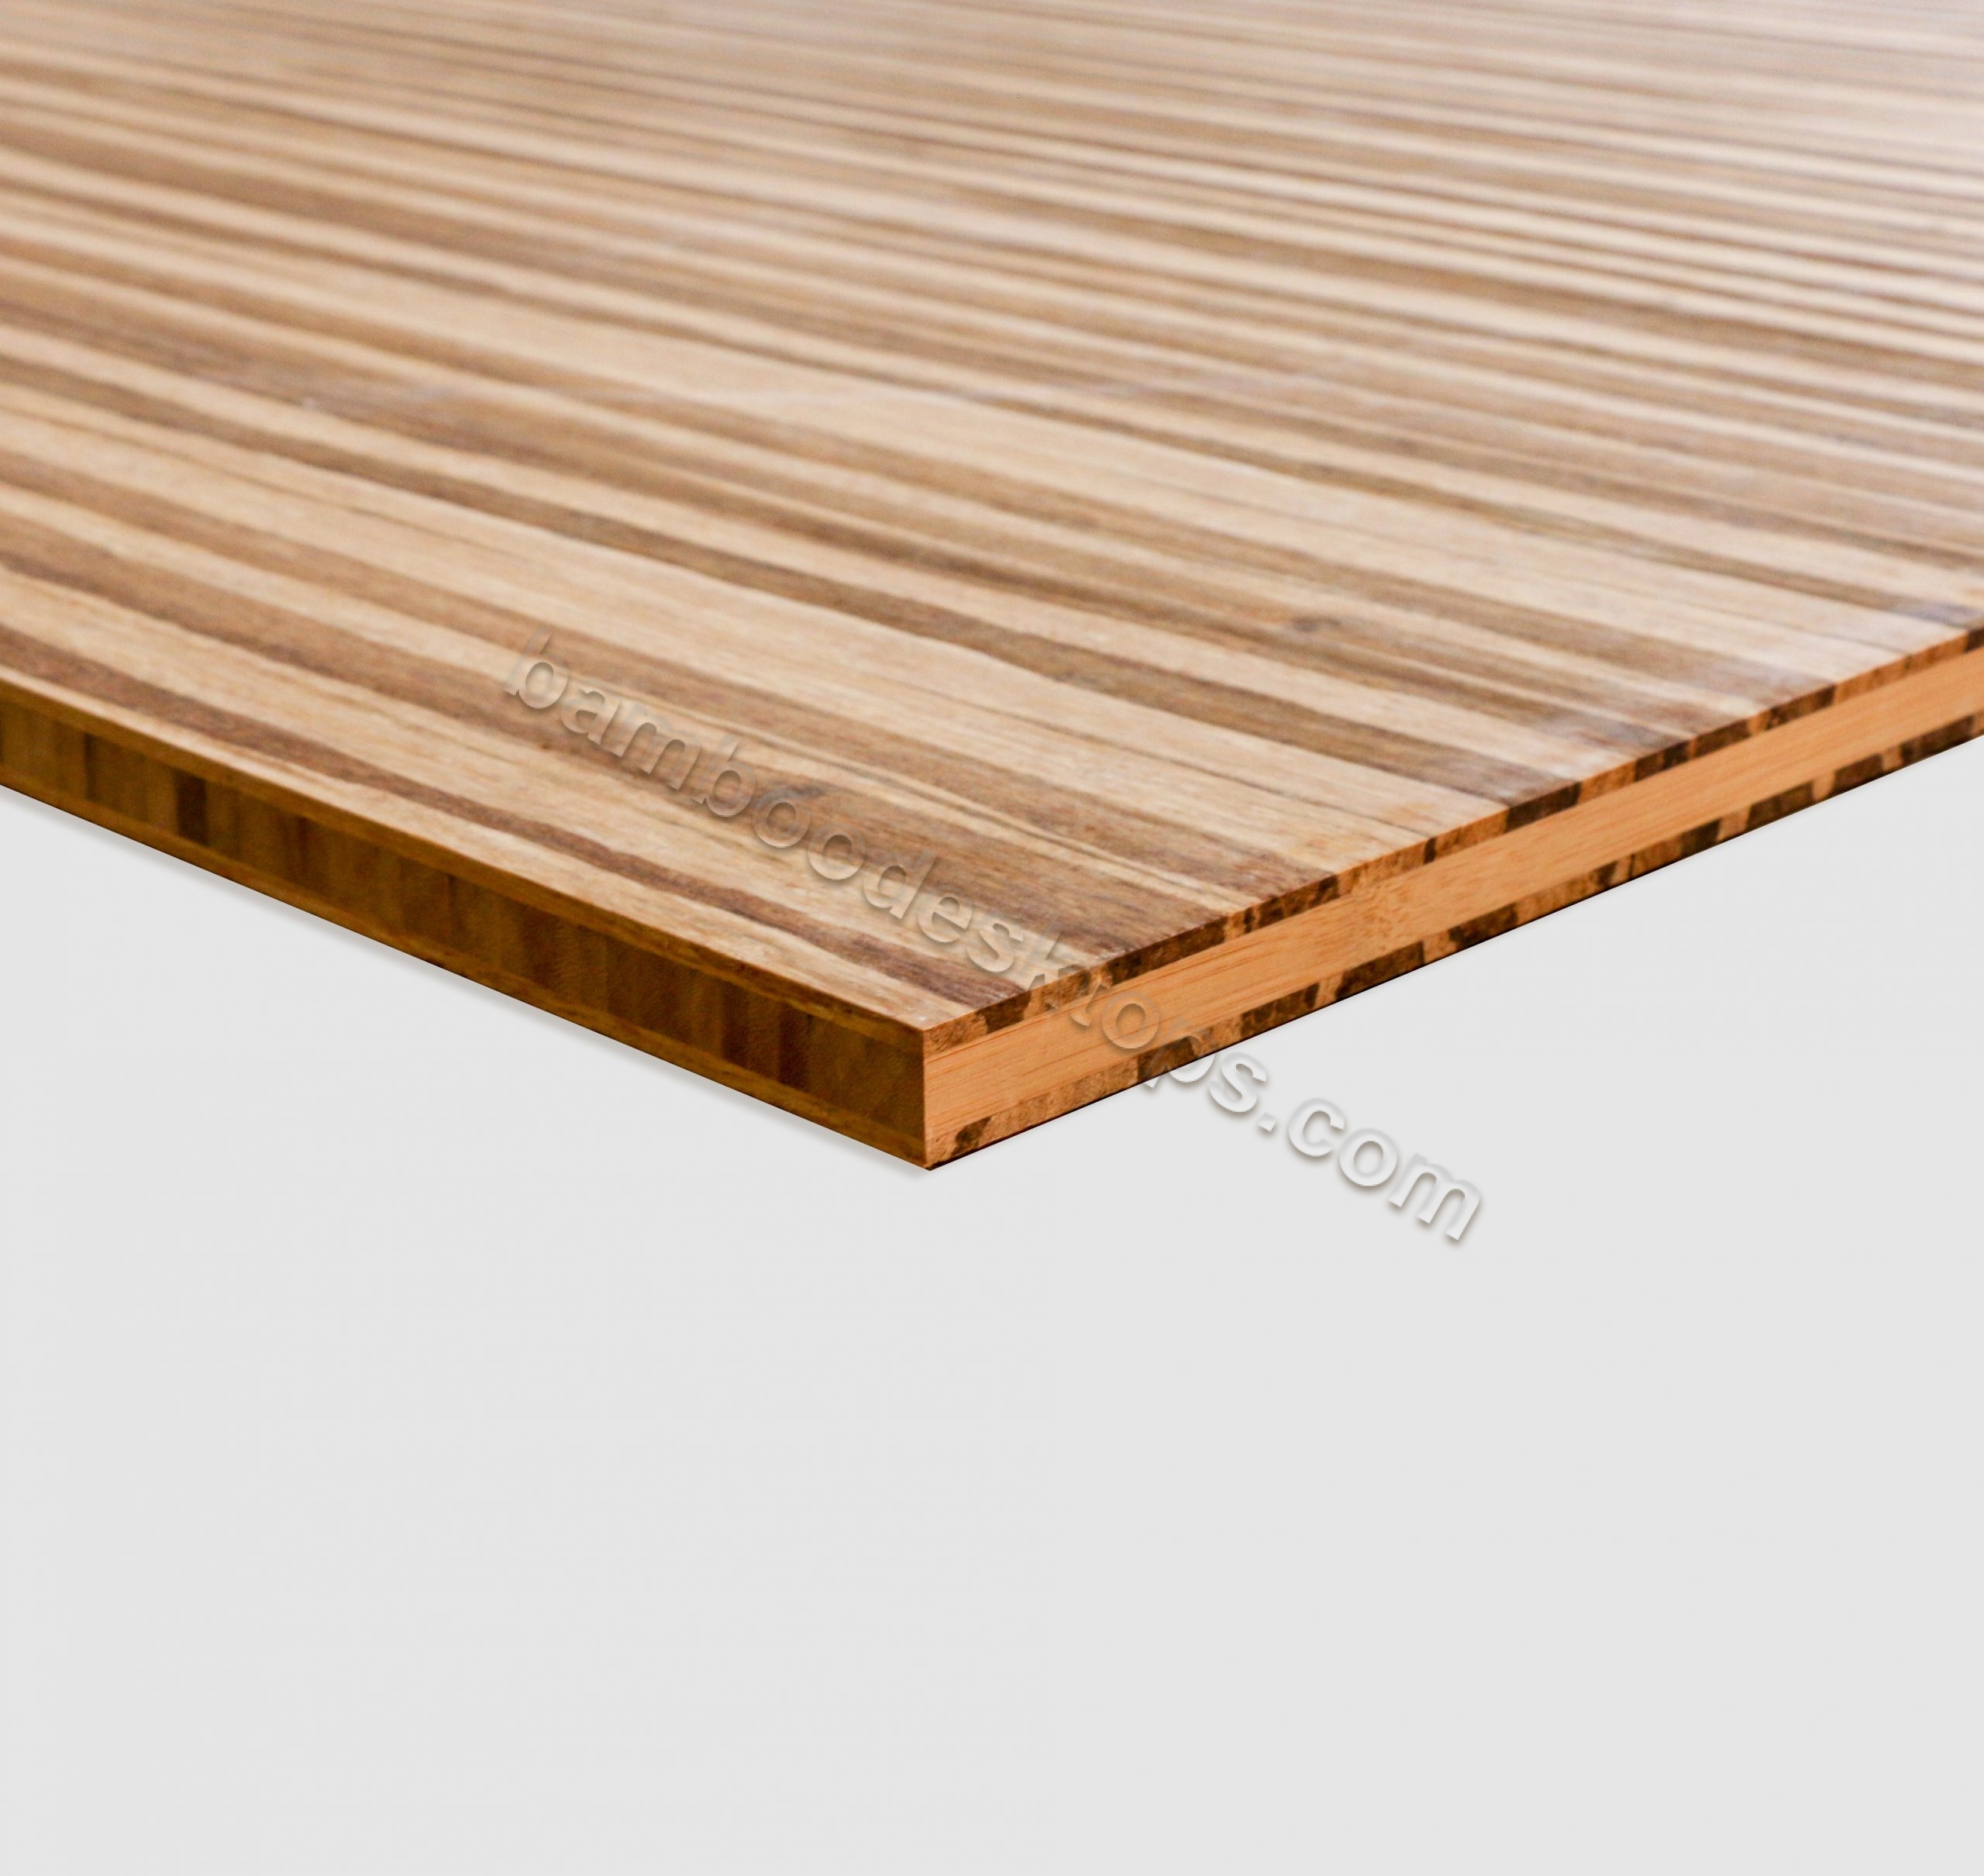 strand woven bamboo boards with tiger color